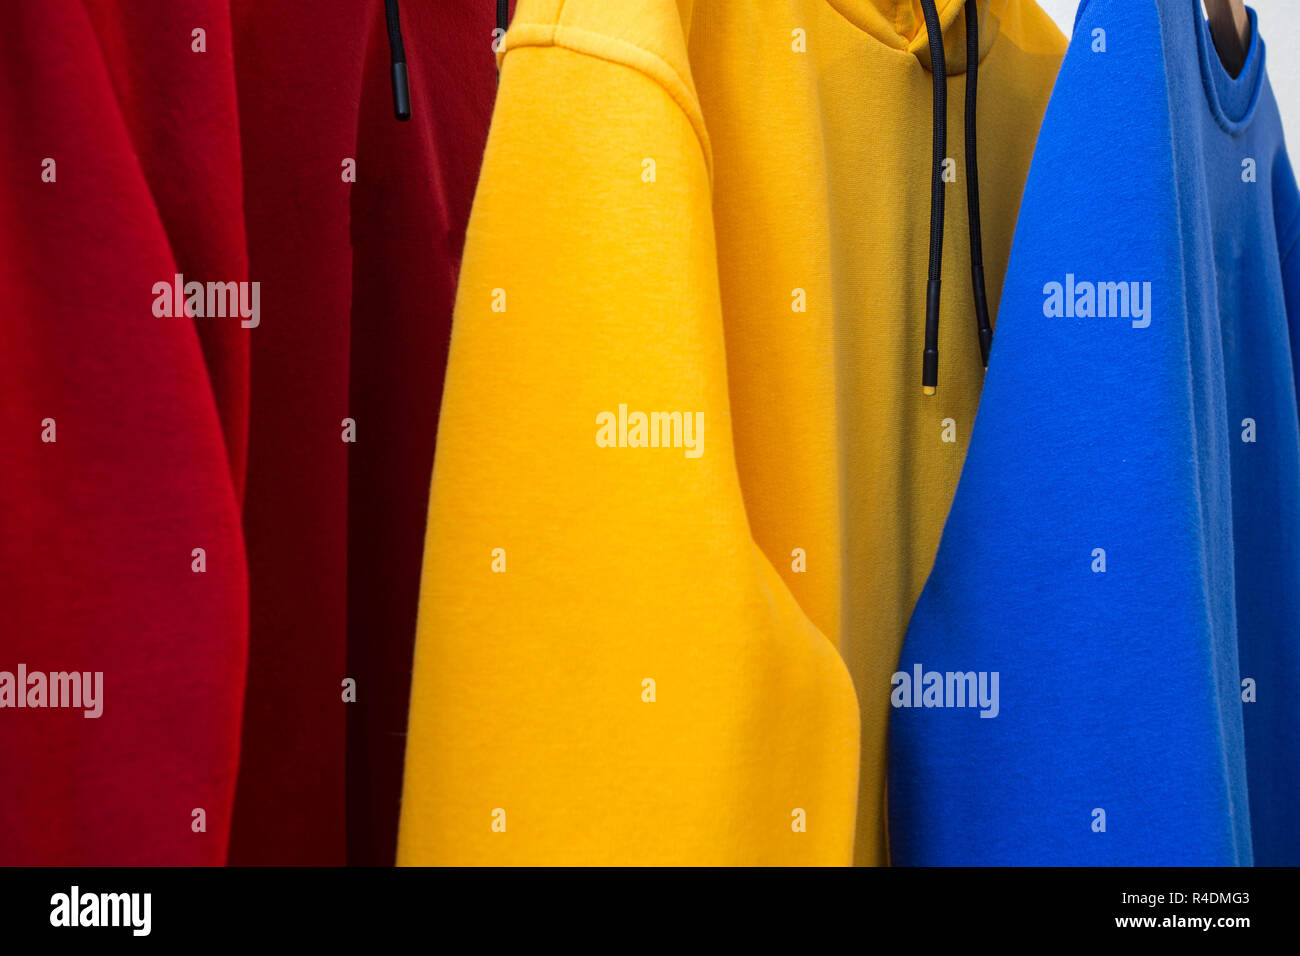 Colorful hoodies on hangers close-up modern design Stock Photo - Alamy